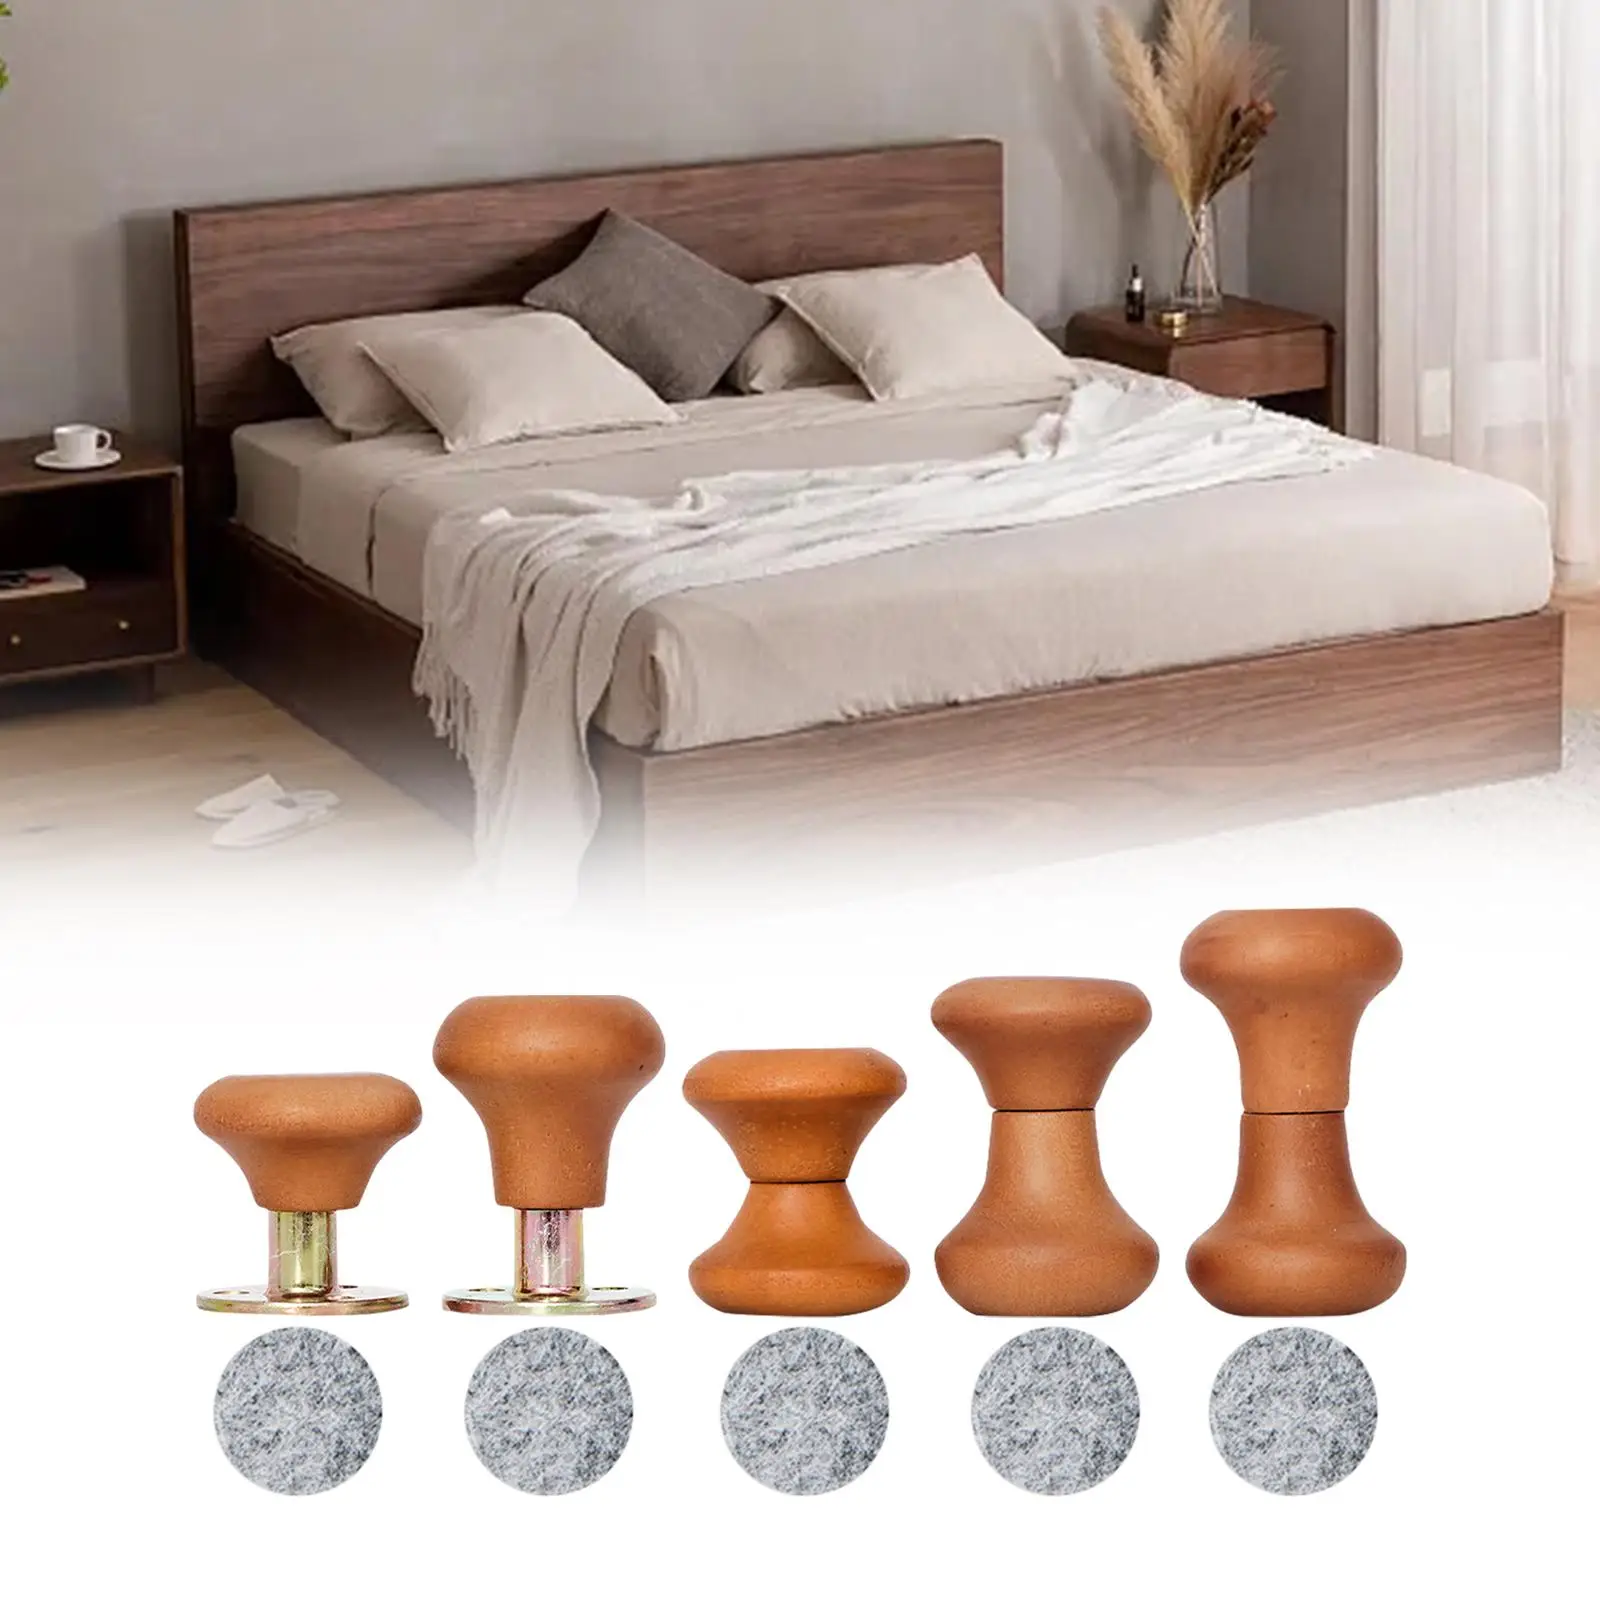 Adjustable Threaded Bed Frame Anti Shaking Tool Headboard Stoppers Wooden Bed Frame Holder for Repairing Tool Room Wall Beds